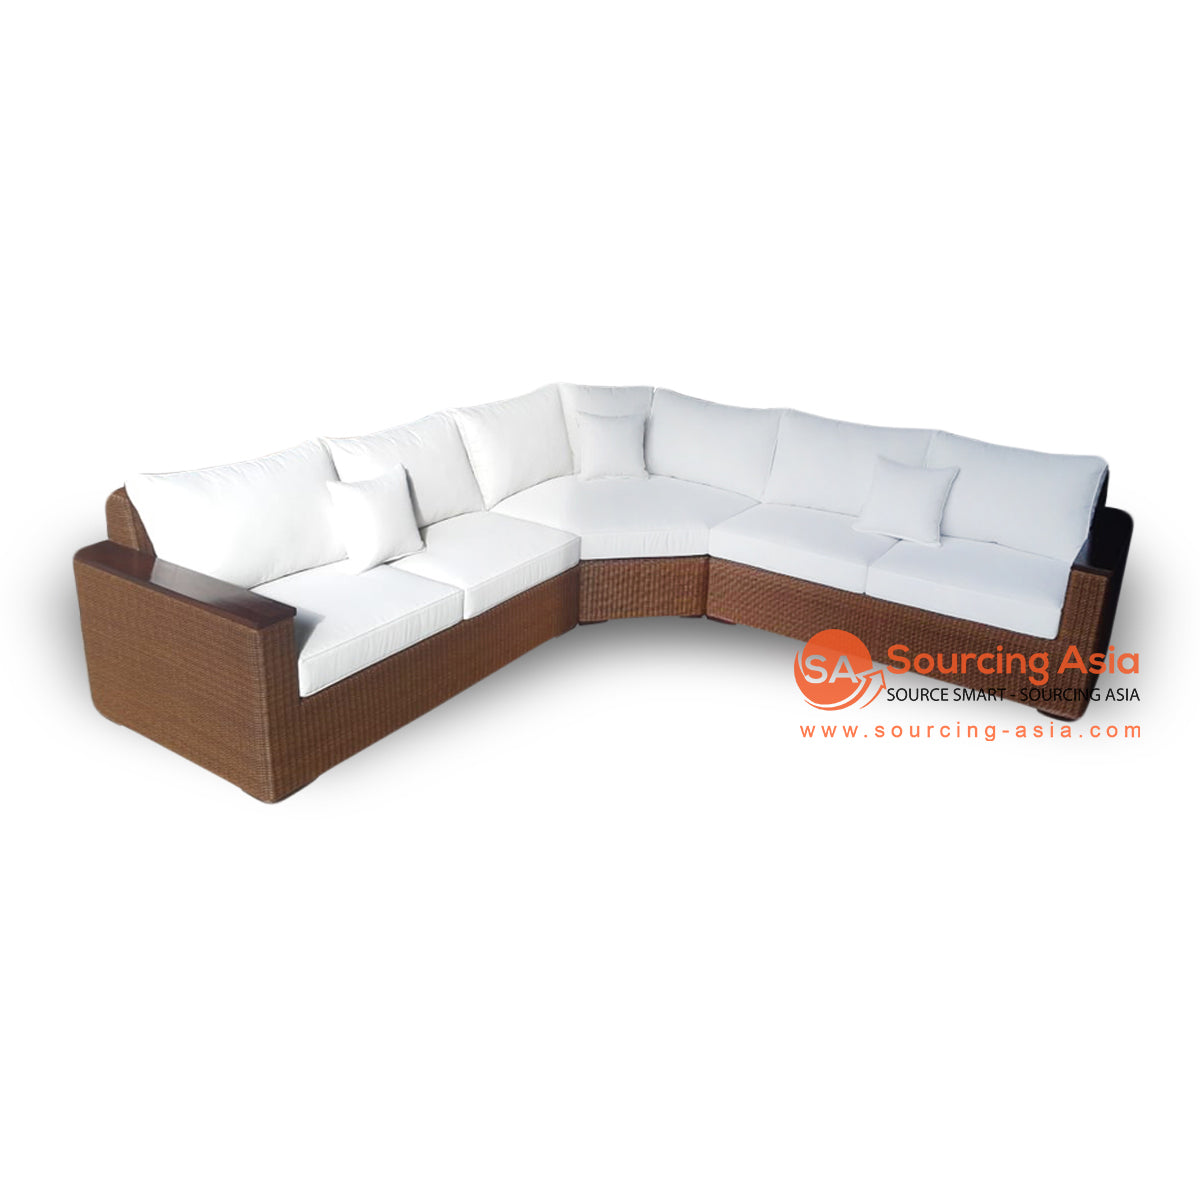 IDR009 BROWN SYNTHETIC RATTAN CORNER SOFA (PRICE WITHOUT CUSHION)